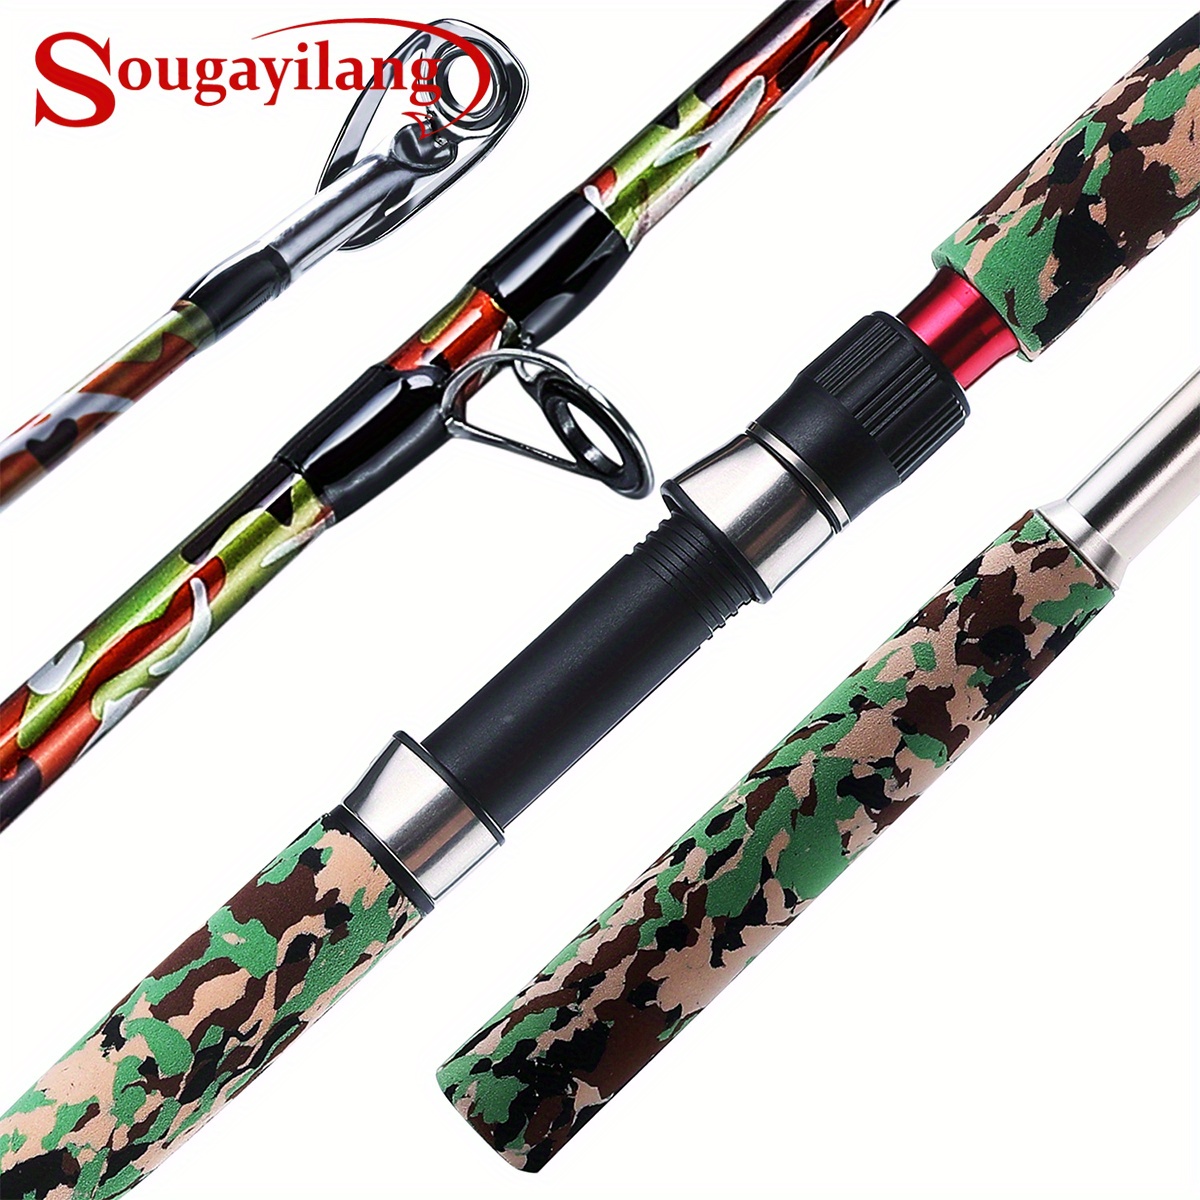 Sougayilang 1pc Strong Durable Carbon Fiber Fishing Rod, 165cm/5.41ft 2  Sections Camouflage Fishing Pole, Suitable For Surfing Offshore Fishing